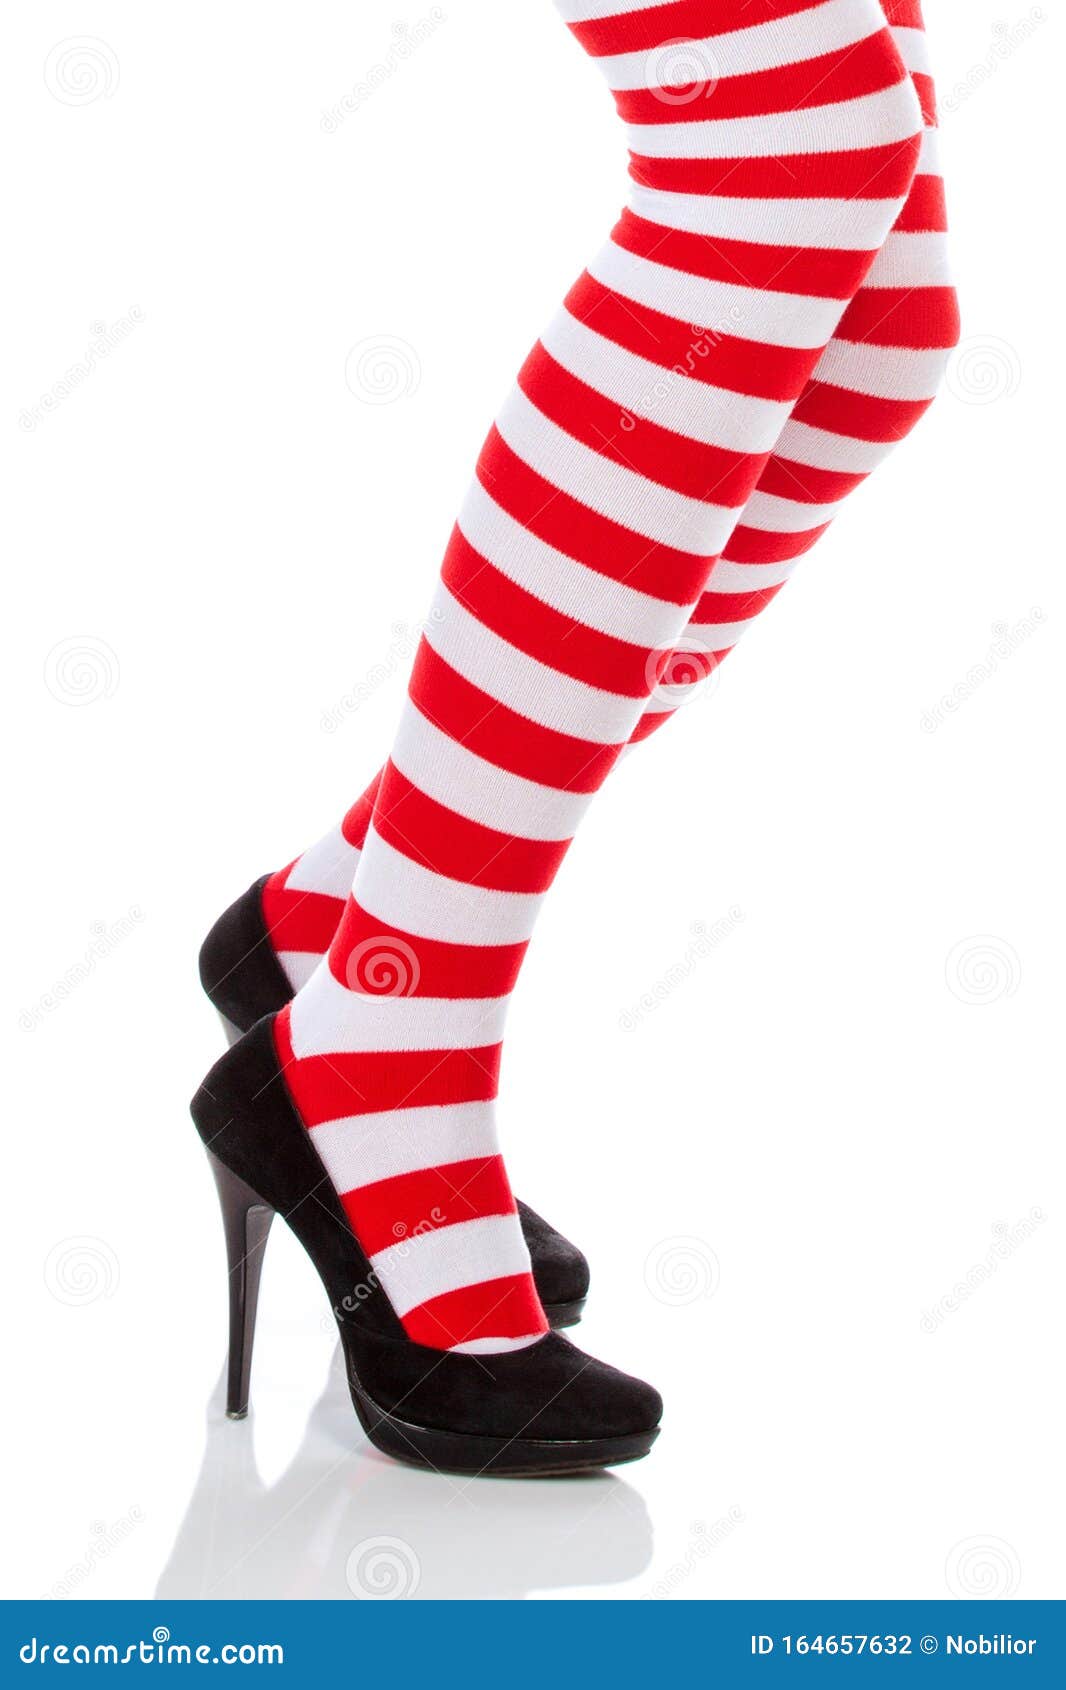 Woman with Long Legs and Stockings Stock Photo - Image of legs ...